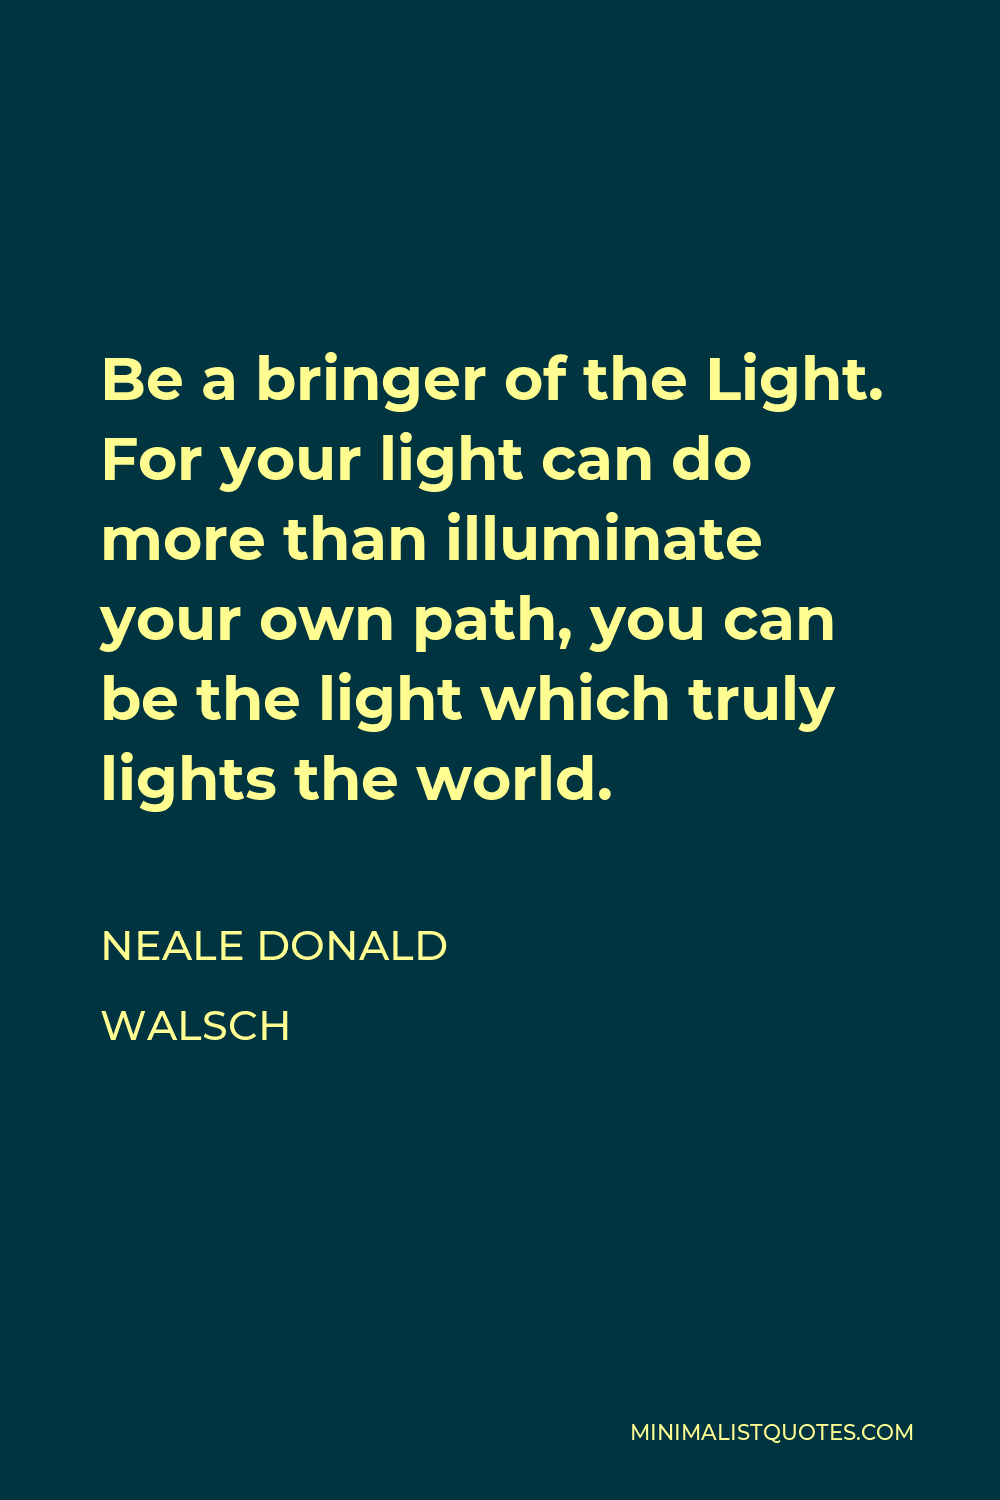 Neale Donald Walsch Quote - Be a bringer of the Light. For your light can do more than illuminate your own path, you can be the light which truly lights the world.